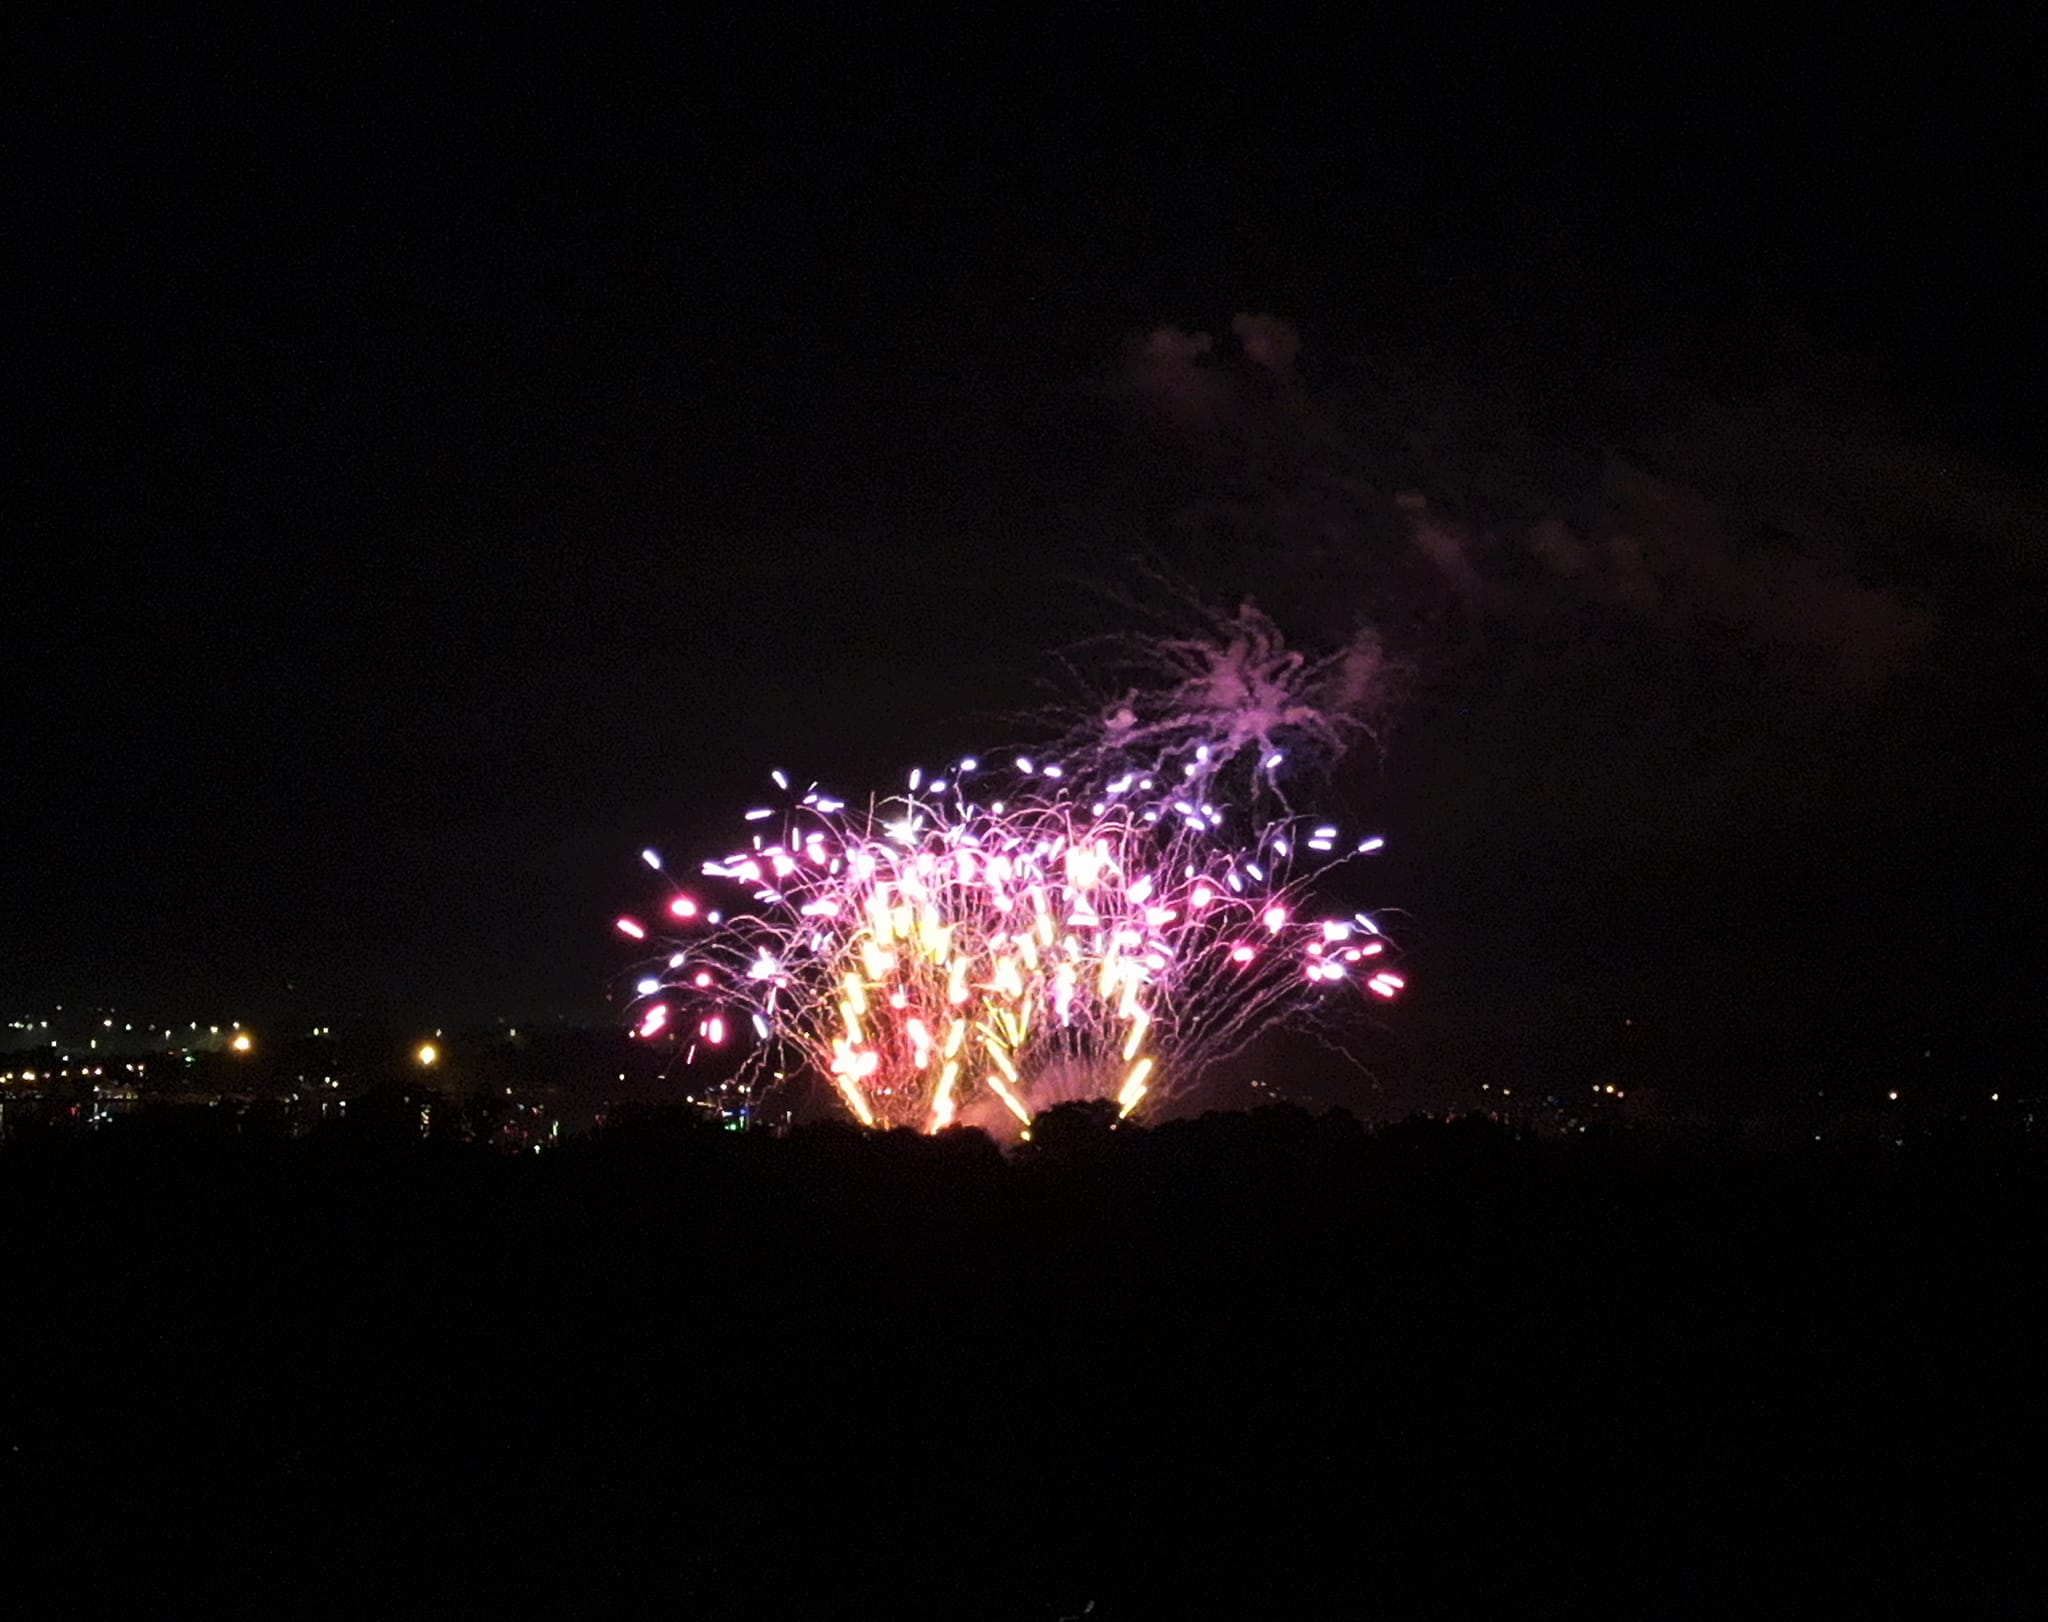 Exciting pyrotechnic display with dazzling fireworks